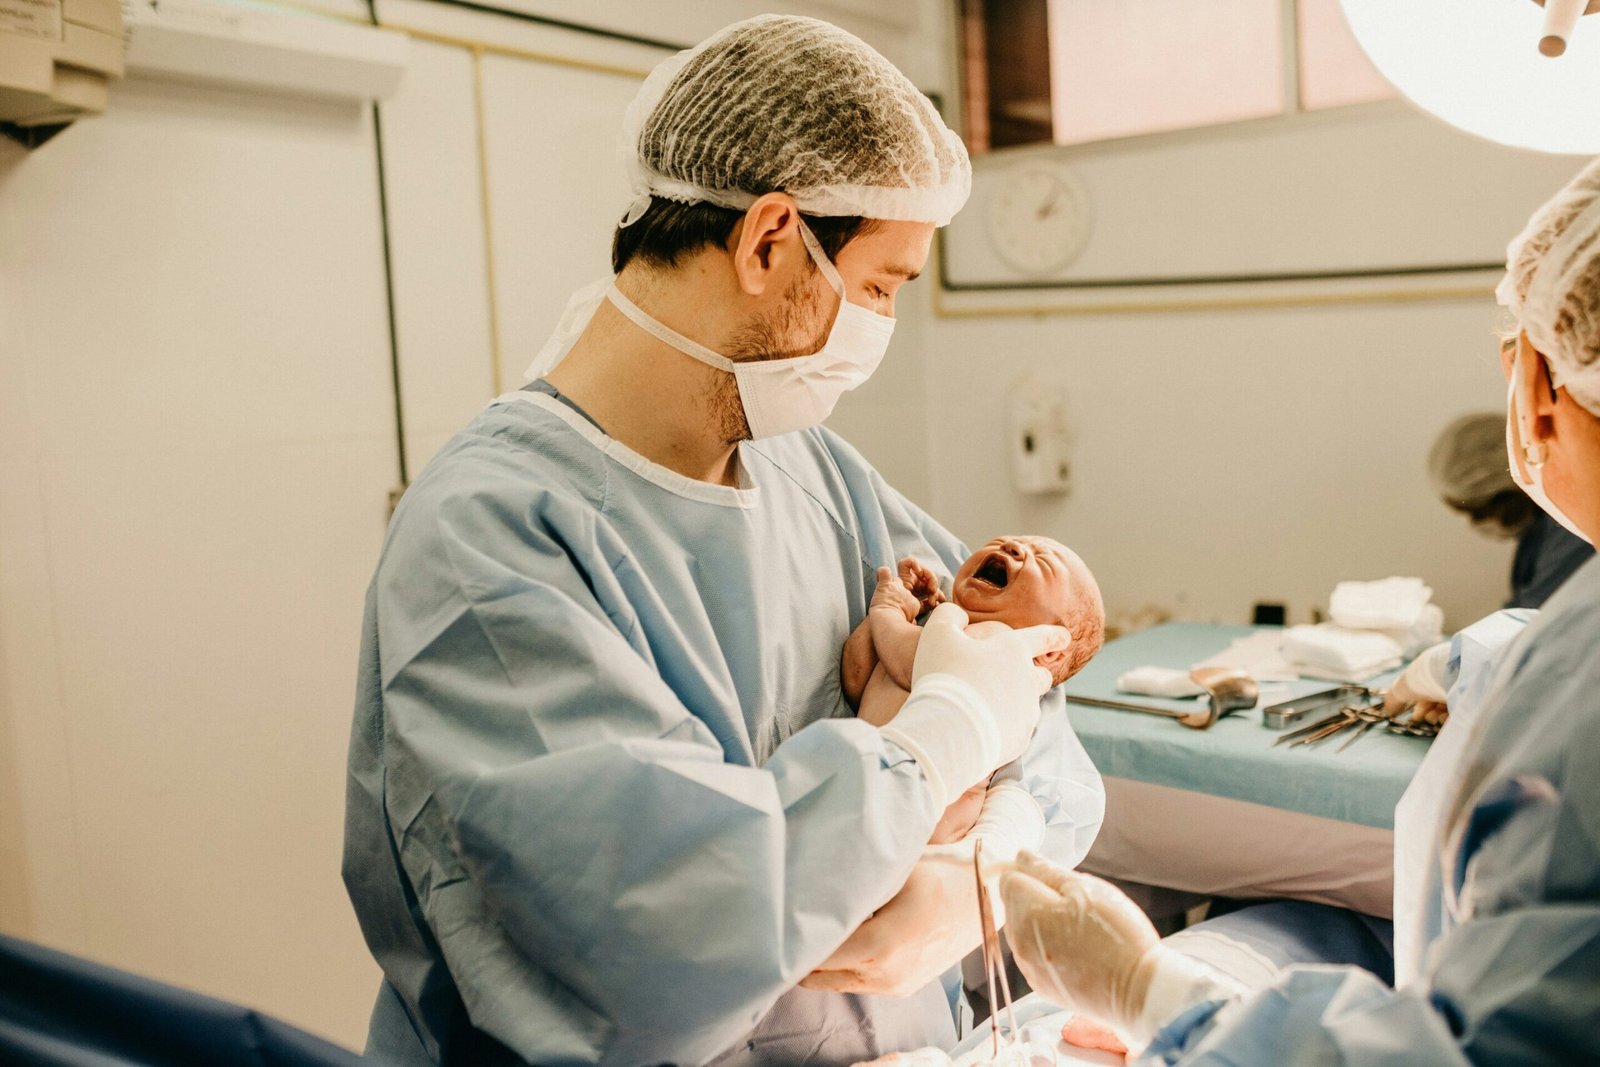 Epidural linked to reduction in serious complications after childbirth